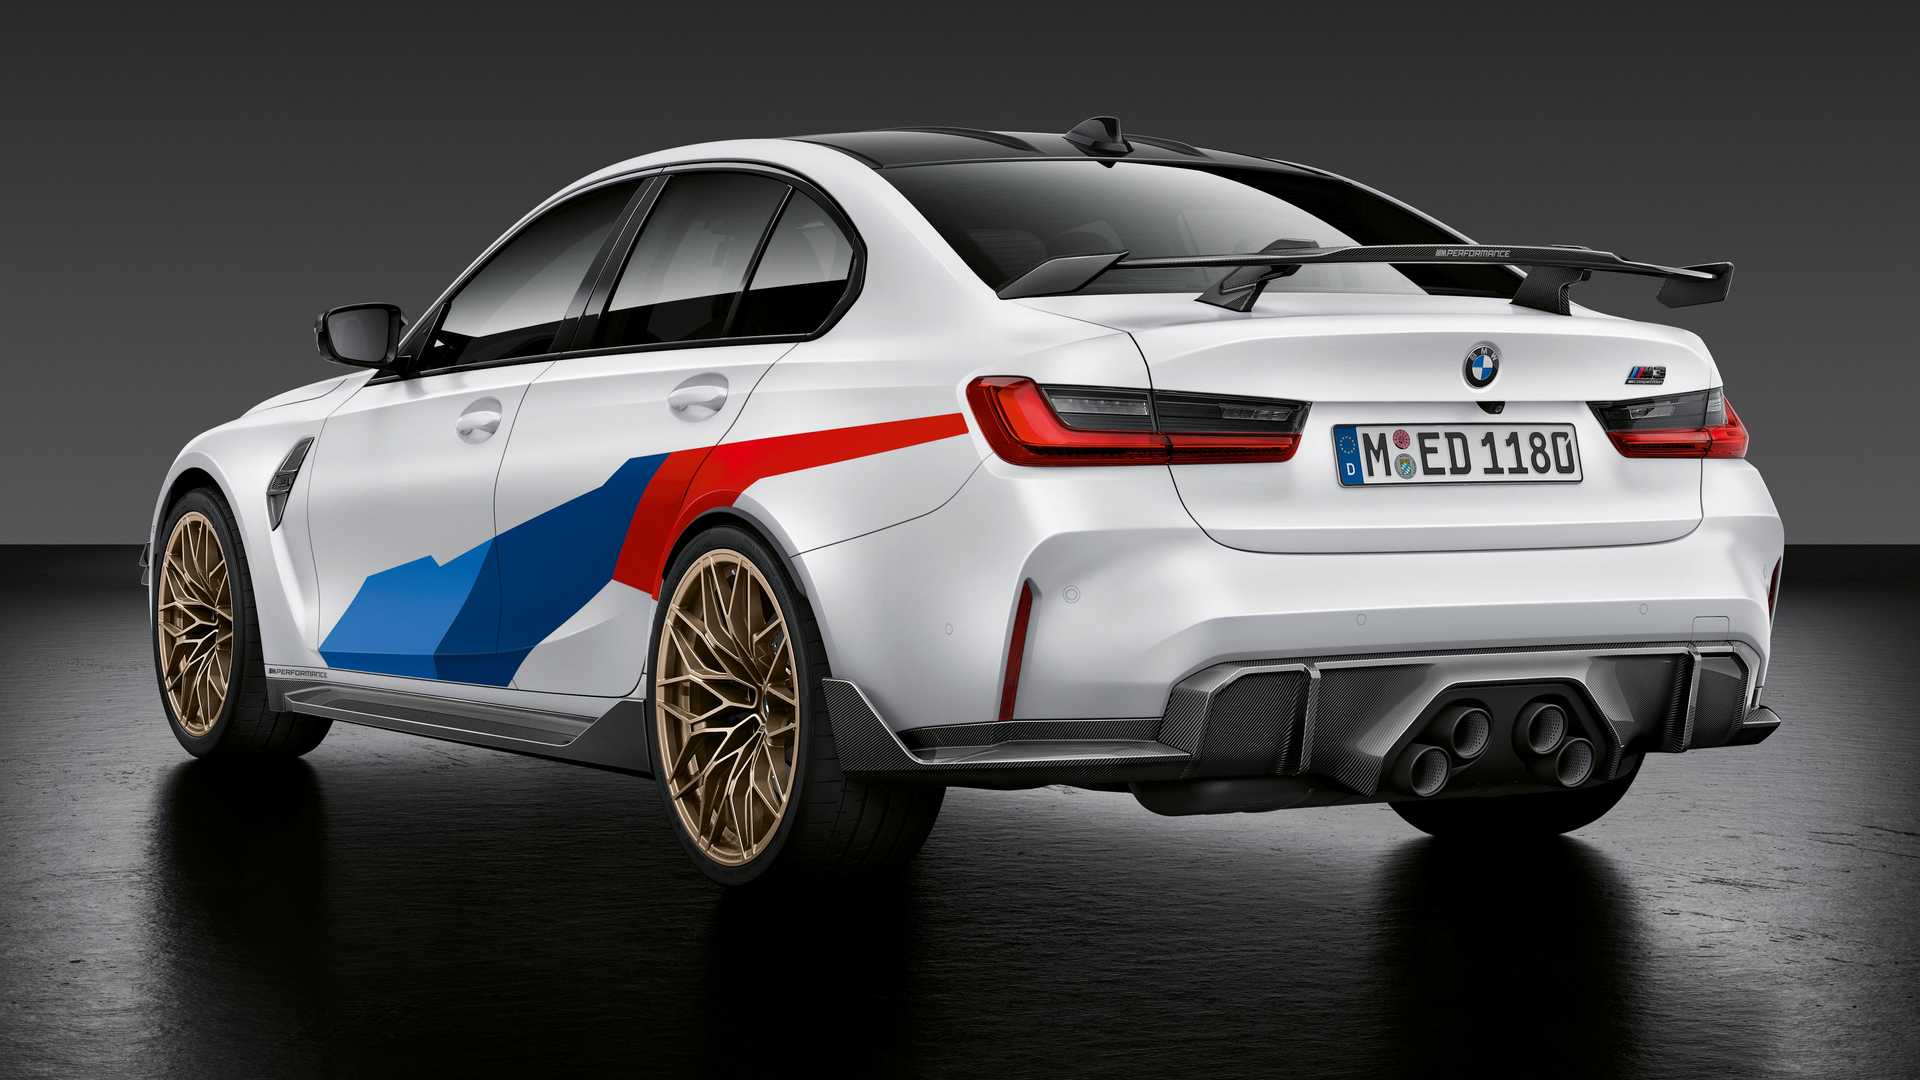 BMW M3 And M4 Gain Center Exhaust And Other M Performance Parts